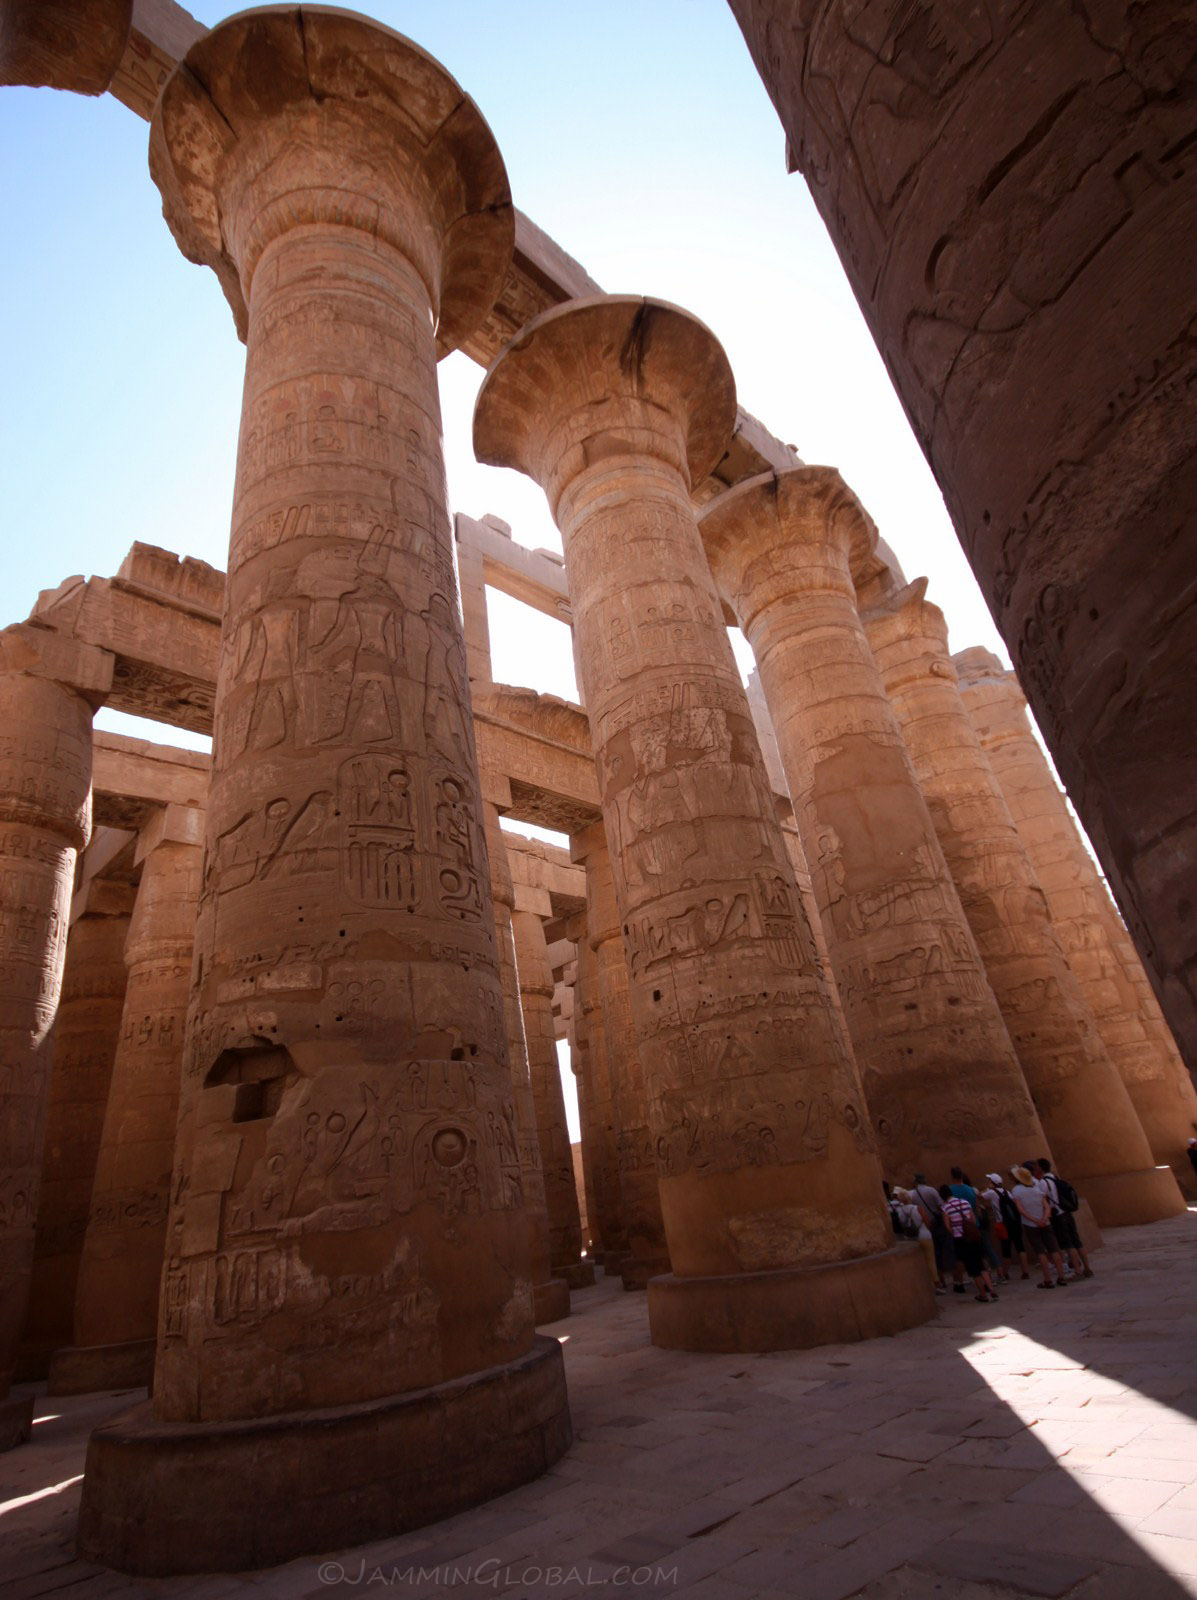 The Great Hypostyle Hall at the Karnak Temple Complex.